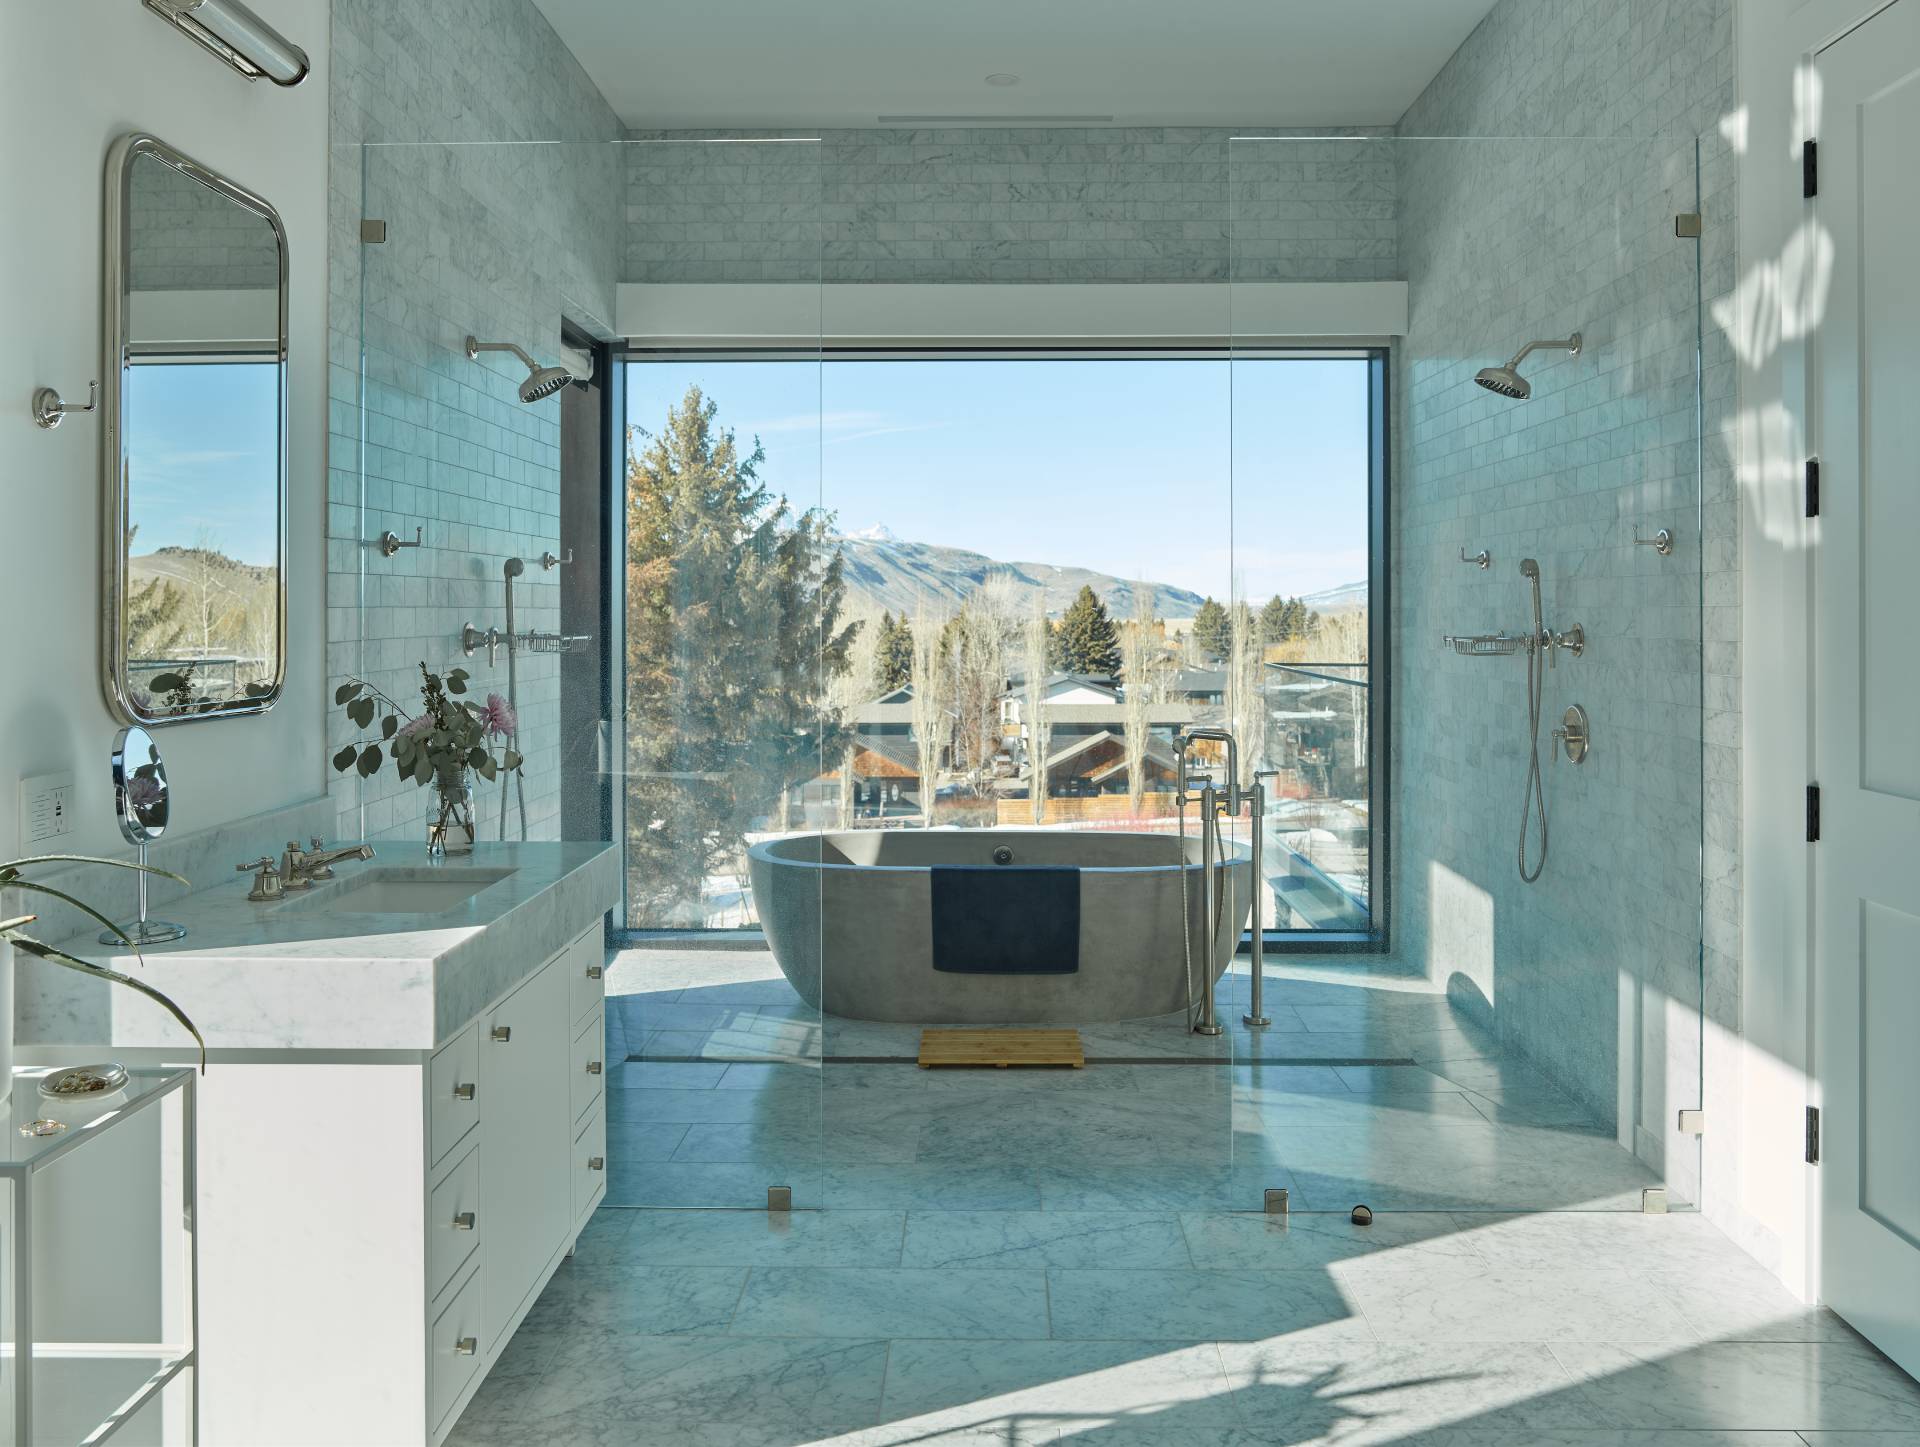 Interior view of the main bathroom at Cache Creek South, a custom home designed and built by Farmer Payne Architects.